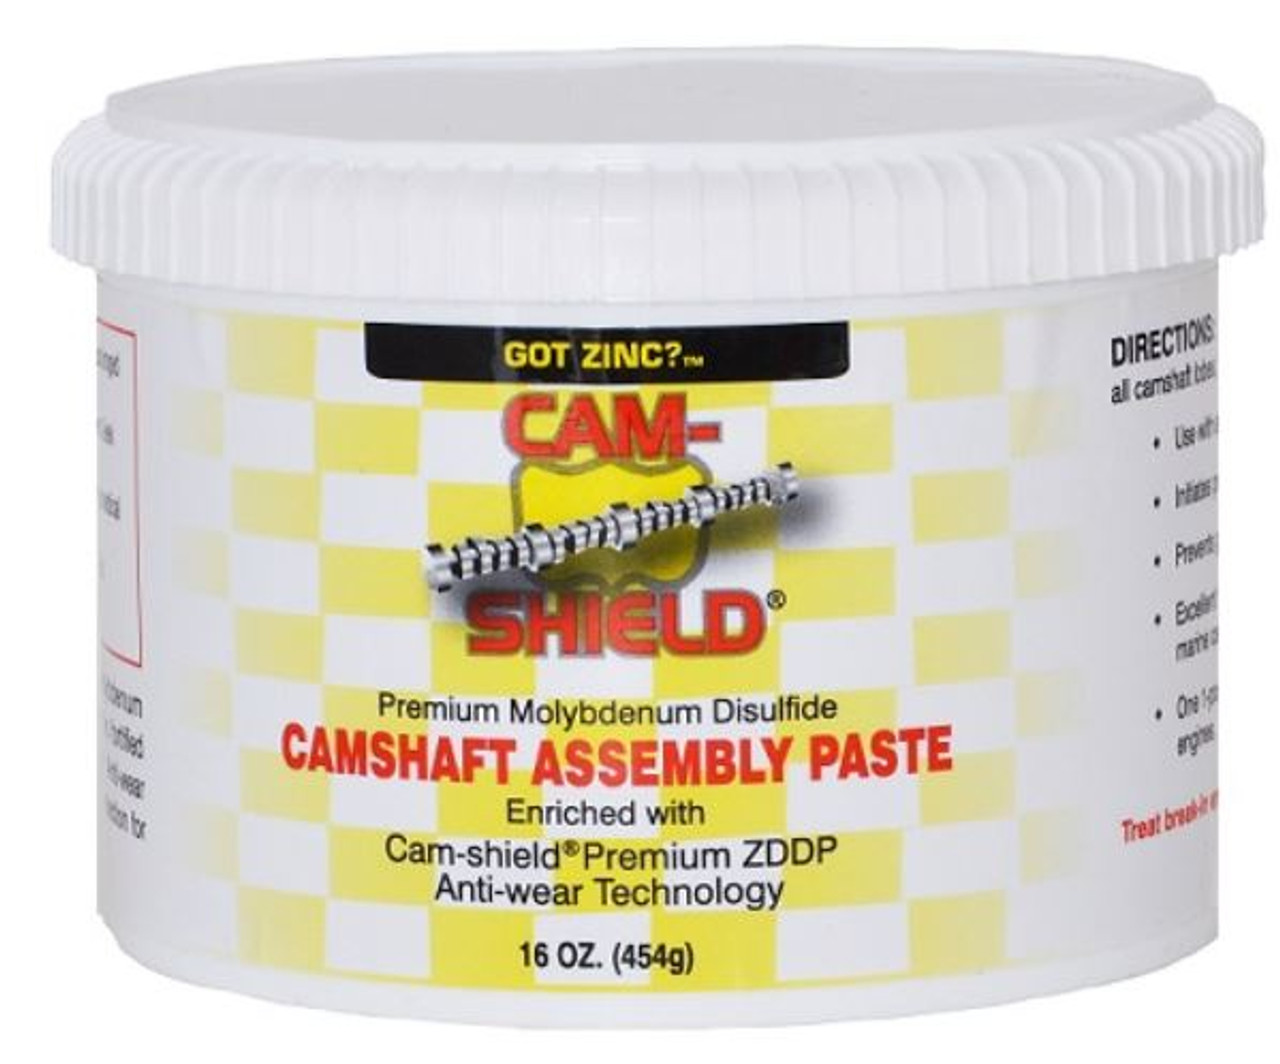 1985 Plymouth Horizon 2.2L Engine Camshaft Assembly Paste ZMOLY-1 -14464